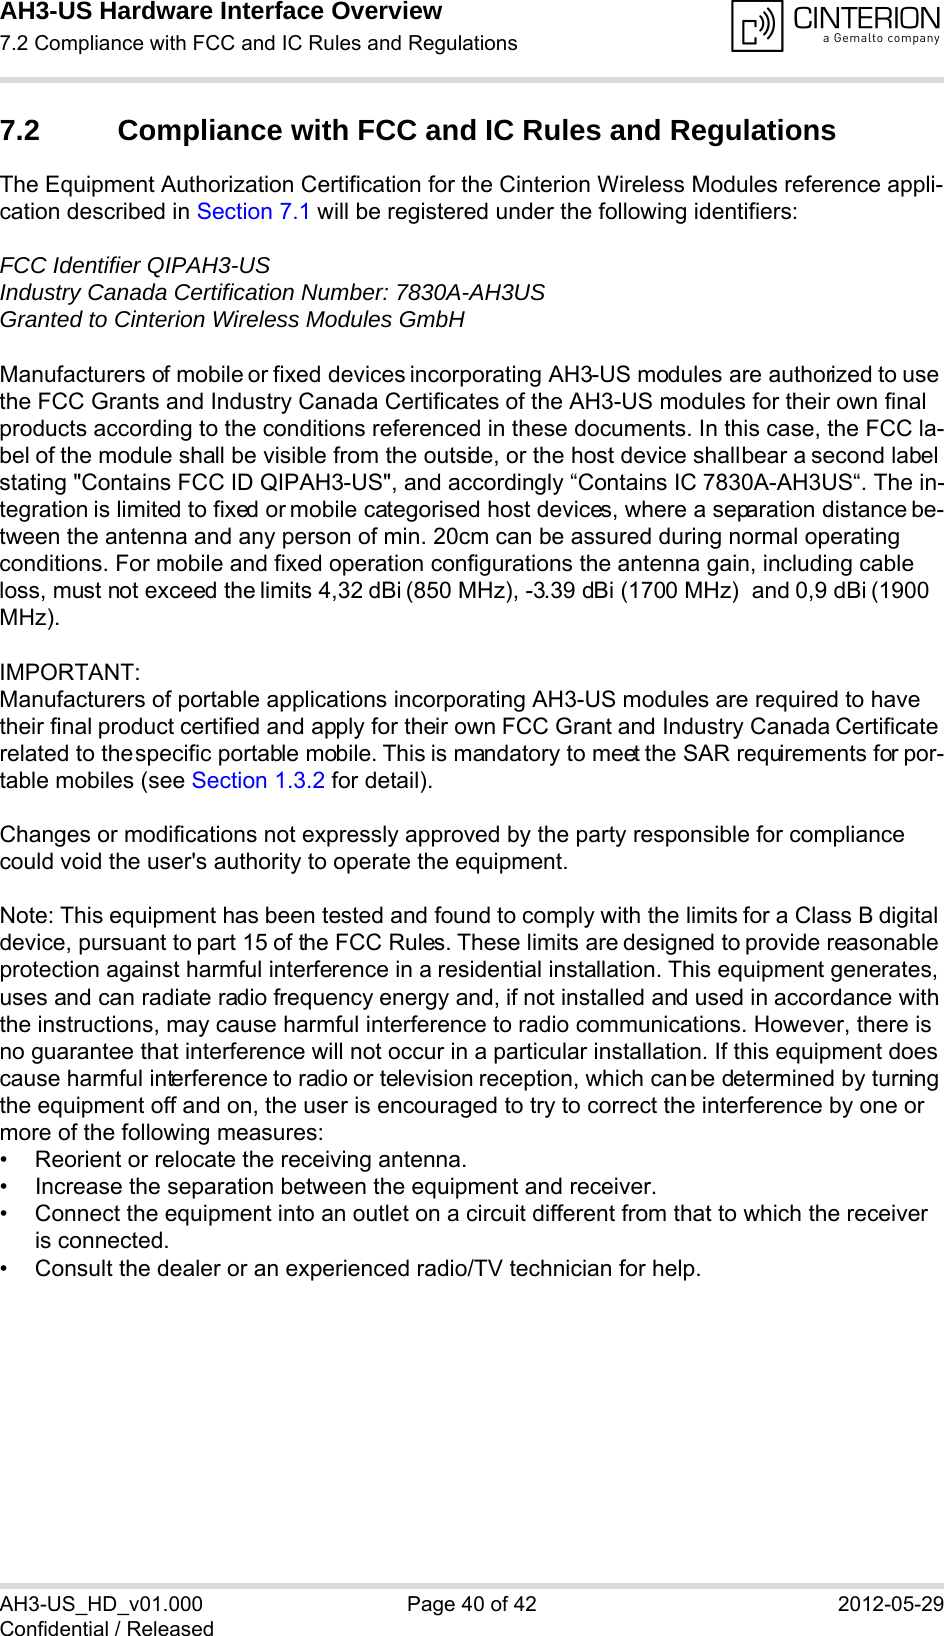 AH3-US Hardware Interface Overview7.2 Compliance with FCC and IC Rules and Regulations40AH3-US_HD_v01.000 Page 40 of 42 2012-05-29Confidential / Released7.2 Compliance with FCC and IC Rules and Regulations The Equipment Authorization Certification for the Cinterion Wireless Modules reference appli-cation described in Section 7.1 will be registered under the following identifiers:FCC Identifier QIPAH3-USIndustry Canada Certification Number: 7830A-AH3USGranted to Cinterion Wireless Modules GmbH Manufacturers of mobile or fixed devices incorporating AH3-US modules are authorized to use the FCC Grants and Industry Canada Certificates of the AH3-US modules for their own final products according to the conditions referenced in these documents. In this case, the FCC la-bel of the module shall be visible from the outside, or the host device shall bear a second label stating &quot;Contains FCC ID QIPAH3-US&quot;, and accordingly “Contains IC 7830A-AH3US“. The in-tegration is limited to fixed or mobile categorised host devices, where a separation distance be-tween the antenna and any person of min. 20cm can be assured during normal operating conditions. For mobile and fixed operation configurations the antenna gain, including cable loss, must not exceed the limits 4,32 dBi (850 MHz), -3.39 dBi (1700 MHz)  and 0,9 dBi (1900 MHz).IMPORTANT:Manufacturers of portable applications incorporating AH3-US modules are required to have their final product certified and apply for their own FCC Grant and Industry Canada Certificate related to the specific portable mobile. This is mandatory to meet the SAR requirements for por-table mobiles (see Section 1.3.2 for detail).Changes or modifications not expressly approved by the party responsible for compliance could void the user&apos;s authority to operate the equipment.Note: This equipment has been tested and found to comply with the limits for a Class B digital device, pursuant to part 15 of the FCC Rules. These limits are designed to provide reasonable protection against harmful interference in a residential installation. This equipment generates, uses and can radiate radio frequency energy and, if not installed and used in accordance with the instructions, may cause harmful interference to radio communications. However, there is no guarantee that interference will not occur in a particular installation. If this equipment does cause harmful interference to radio or television reception, which can be determined by turning the equipment off and on, the user is encouraged to try to correct the interference by one or more of the following measures: • Reorient or relocate the receiving antenna. • Increase the separation between the equipment and receiver. • Connect the equipment into an outlet on a circuit different from that to which the receiver is connected. • Consult the dealer or an experienced radio/TV technician for help.